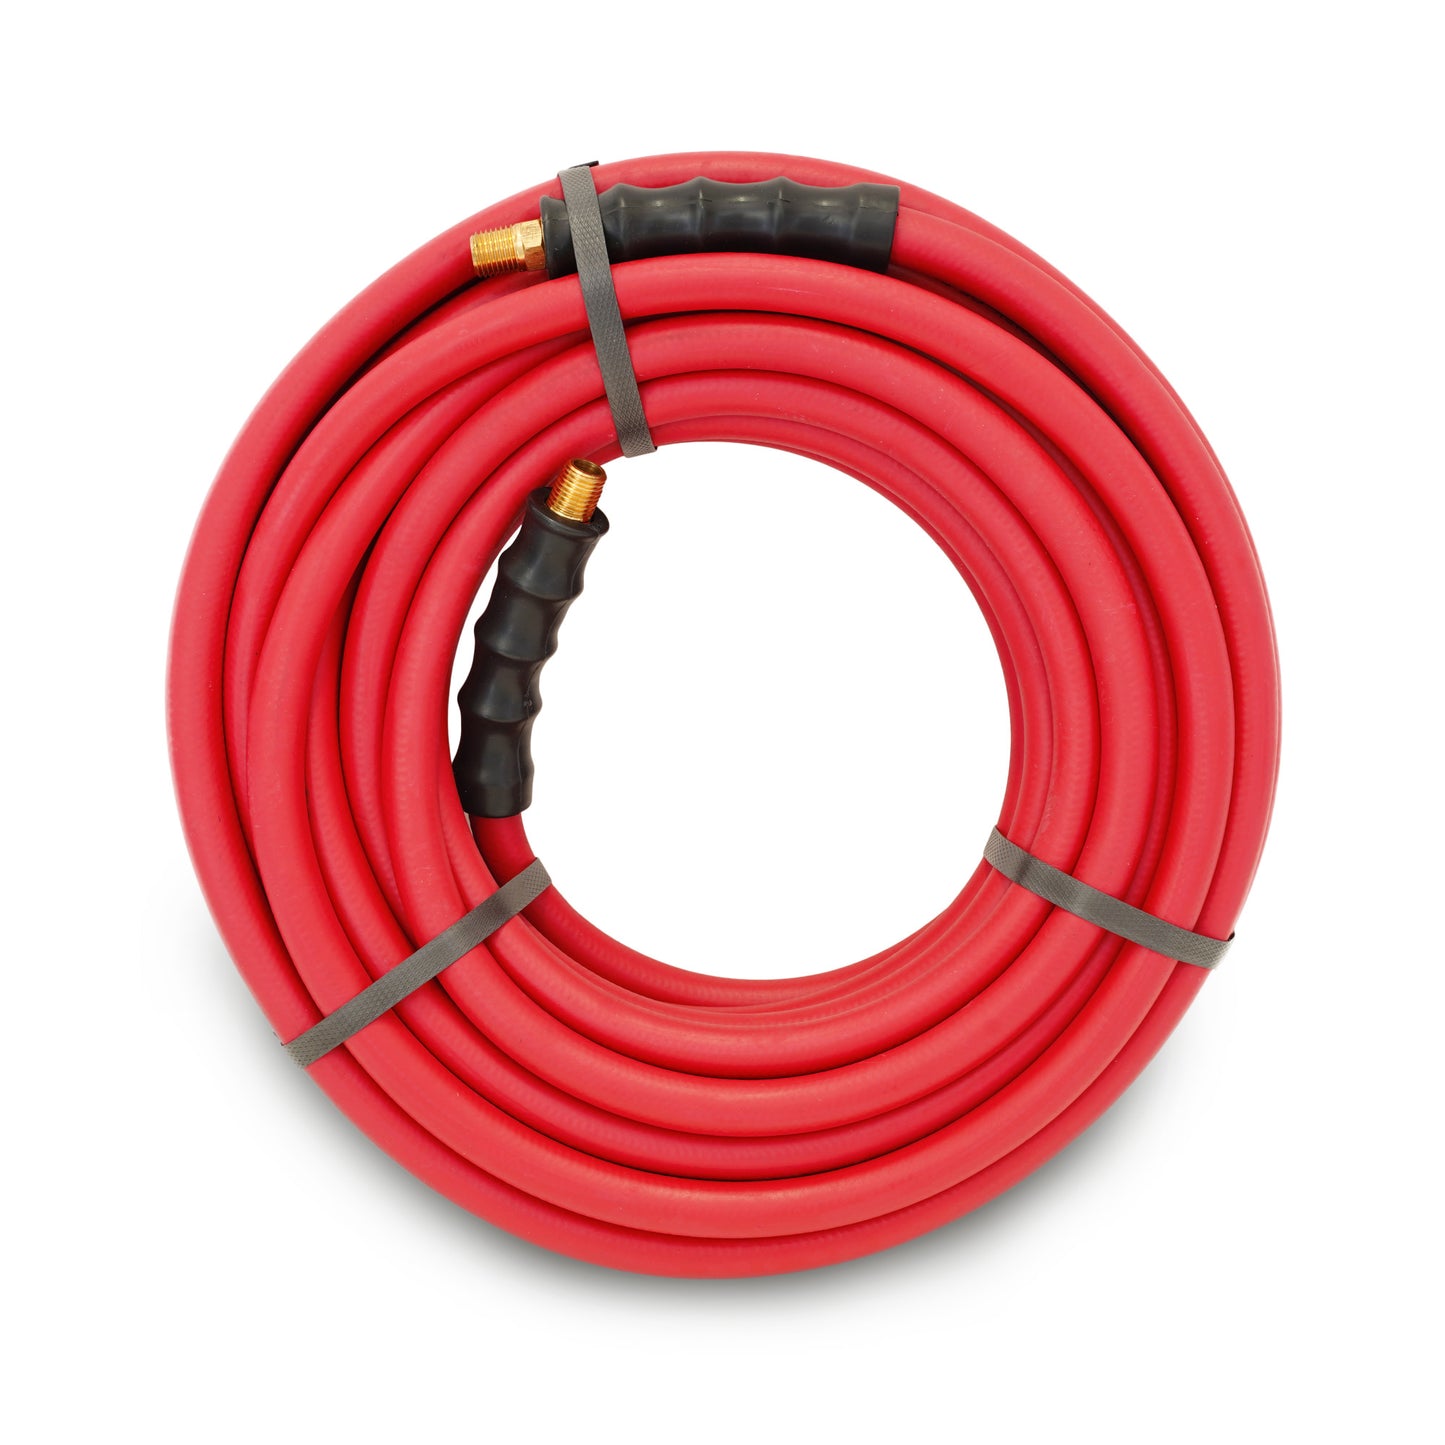 50-Foot x 3/8-Inch Rubber Air Hose with 1/4-inch Male NPT Brass Fittings